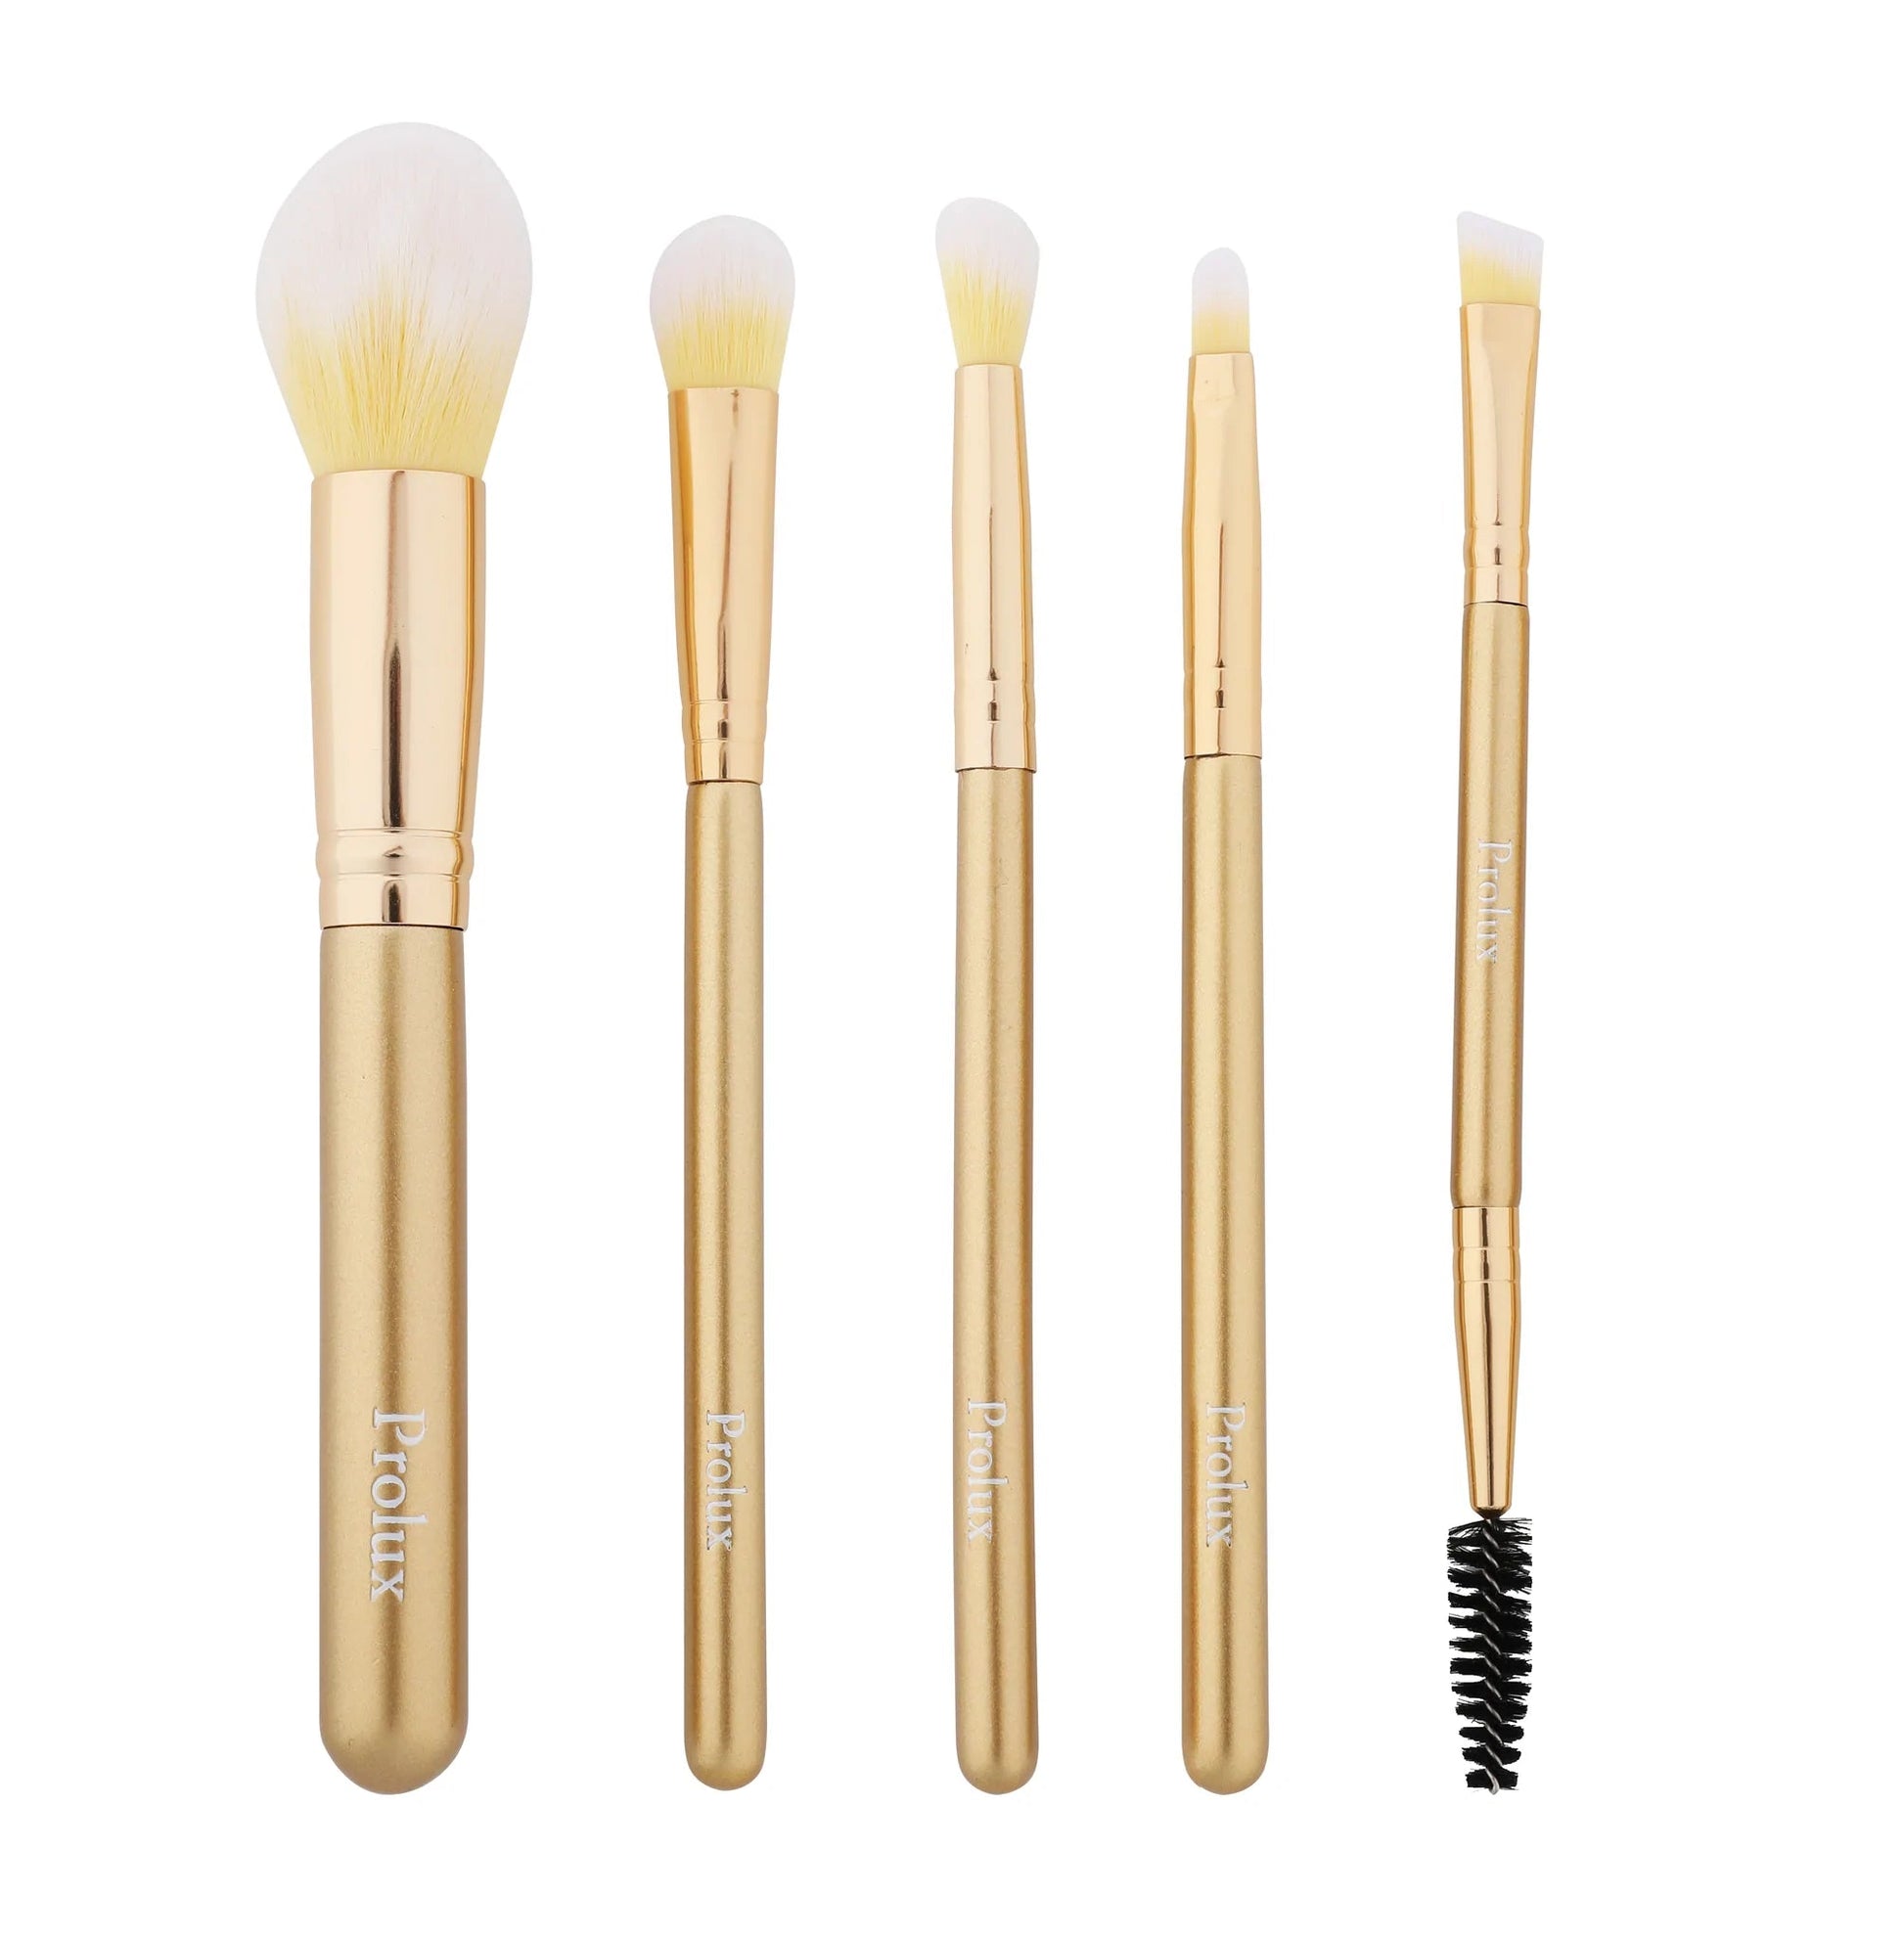 Prolux Gold Deluxe Brush Set - DaizyKat Cosmetics Prolux Gold Deluxe Brush Set Prolux